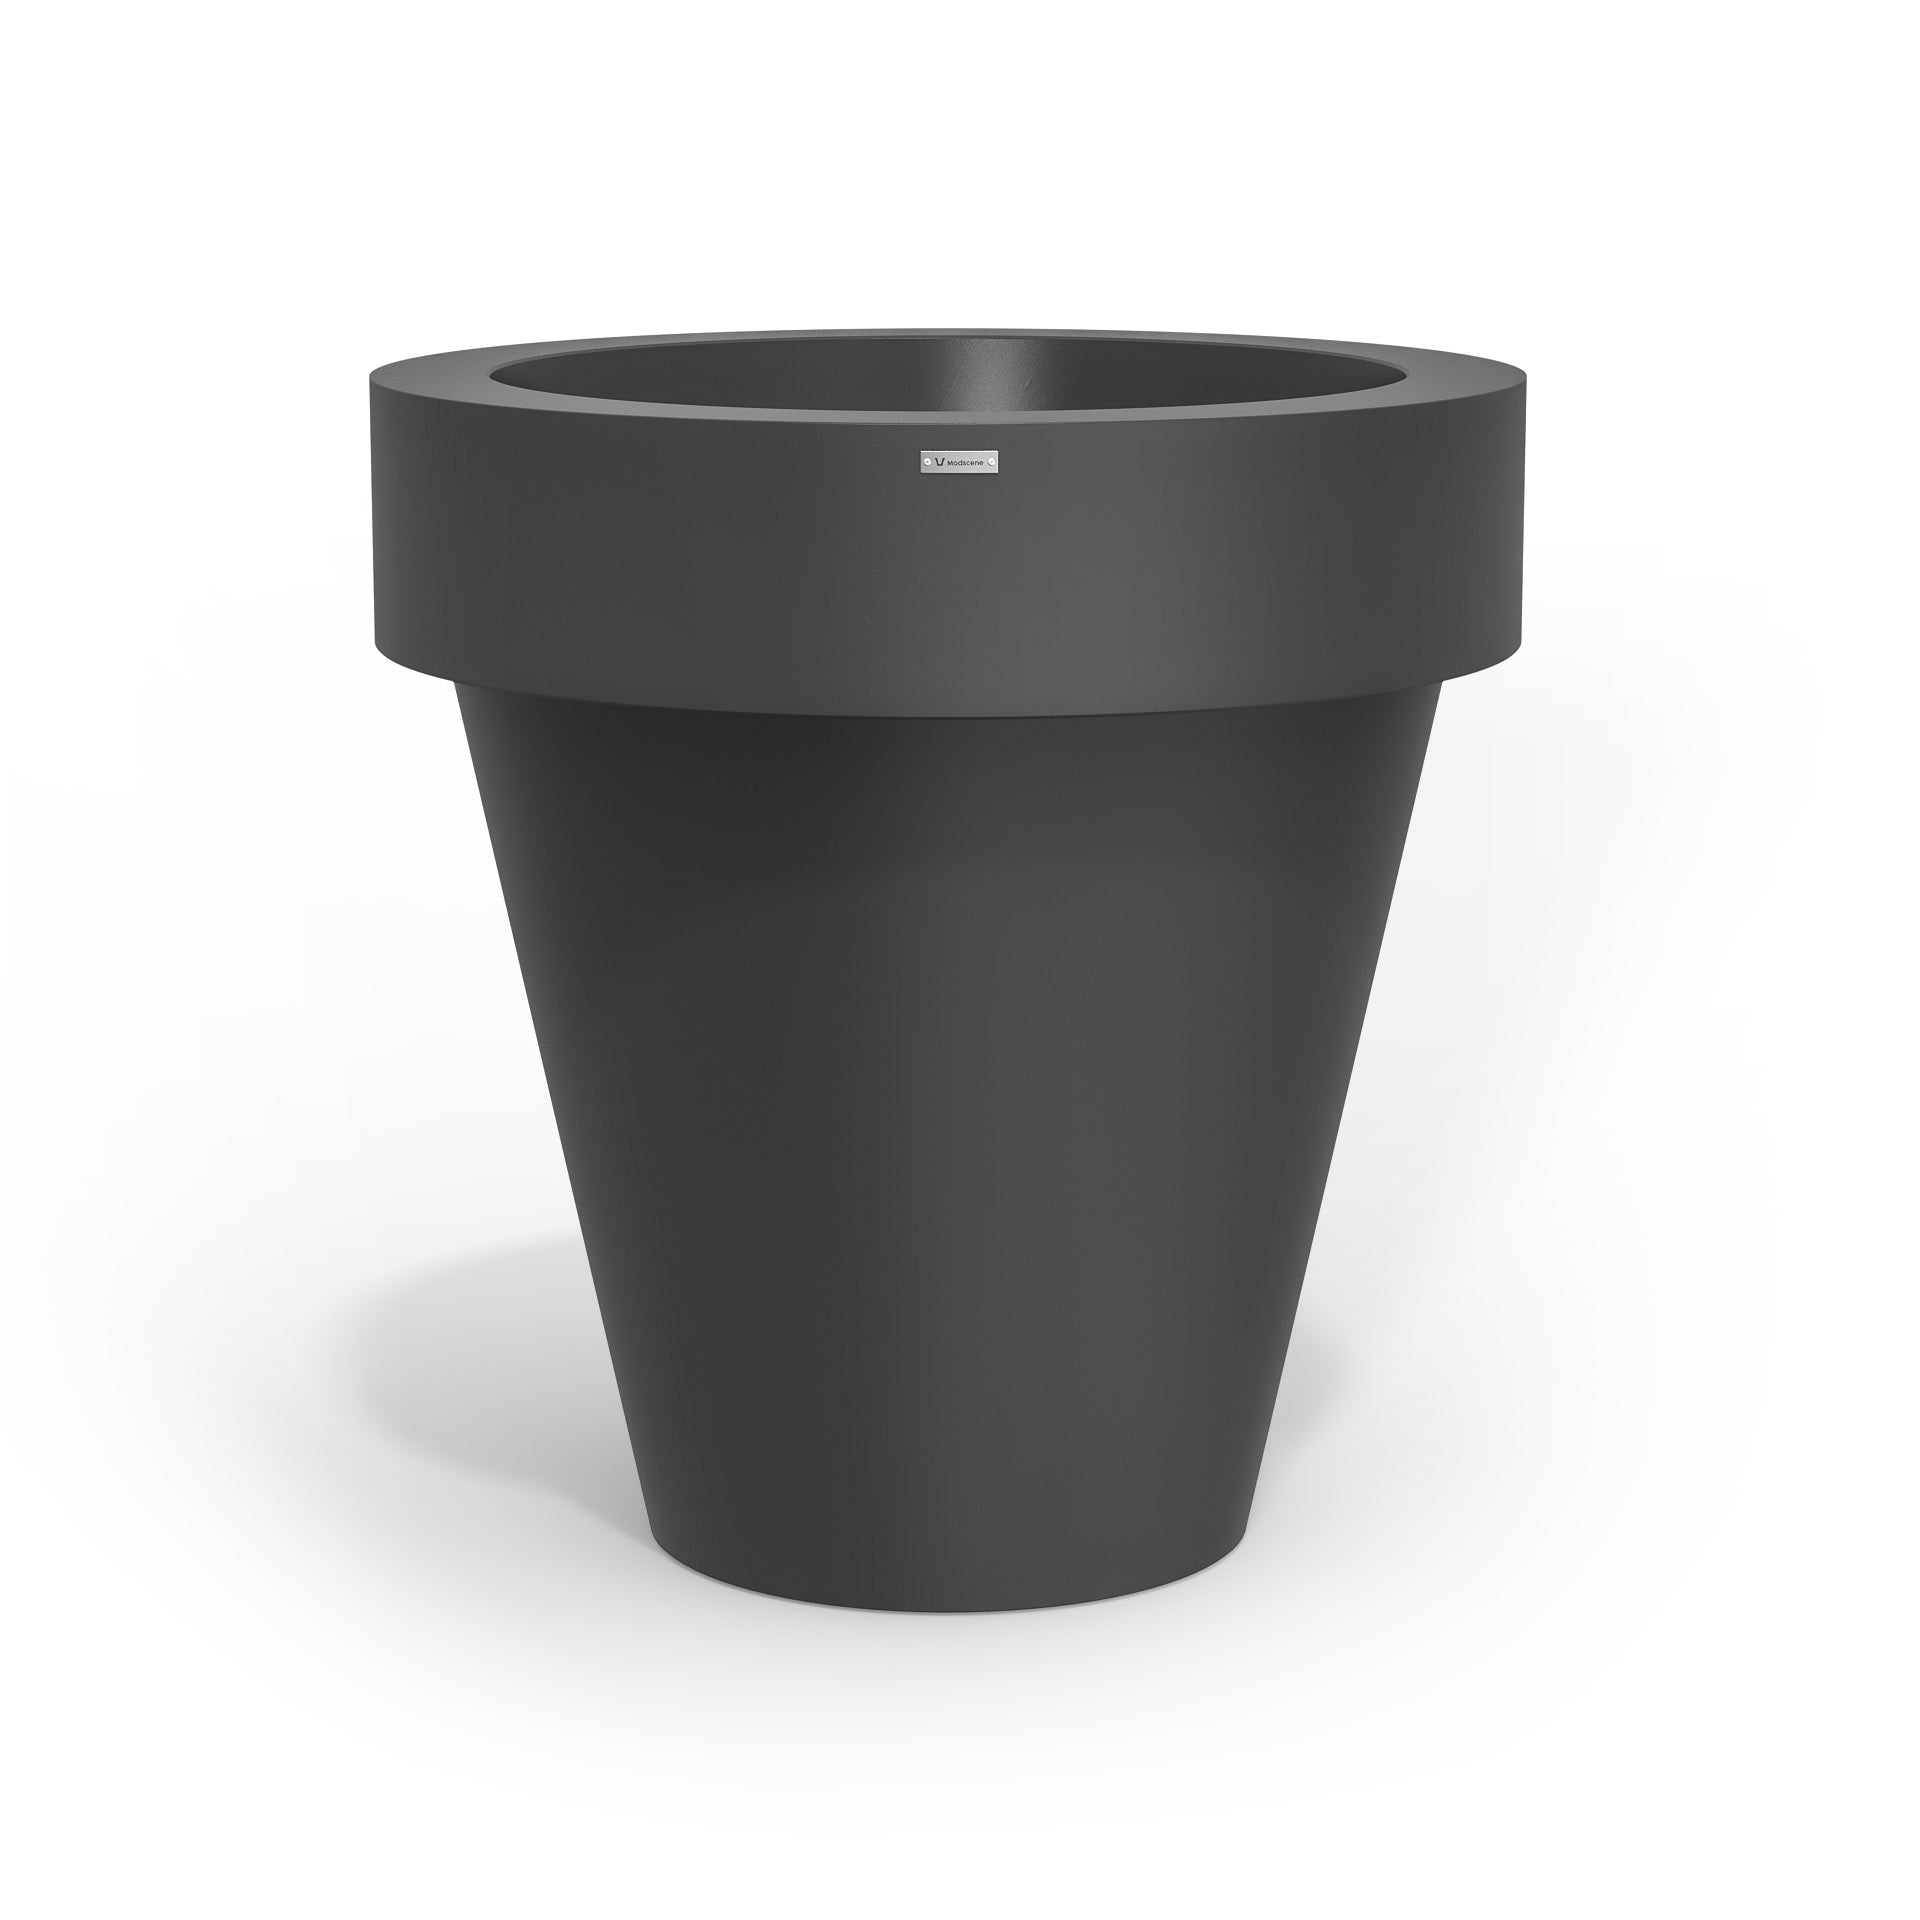 Extra large Modscene planter pot in a dark grey colour. New Zealand made.